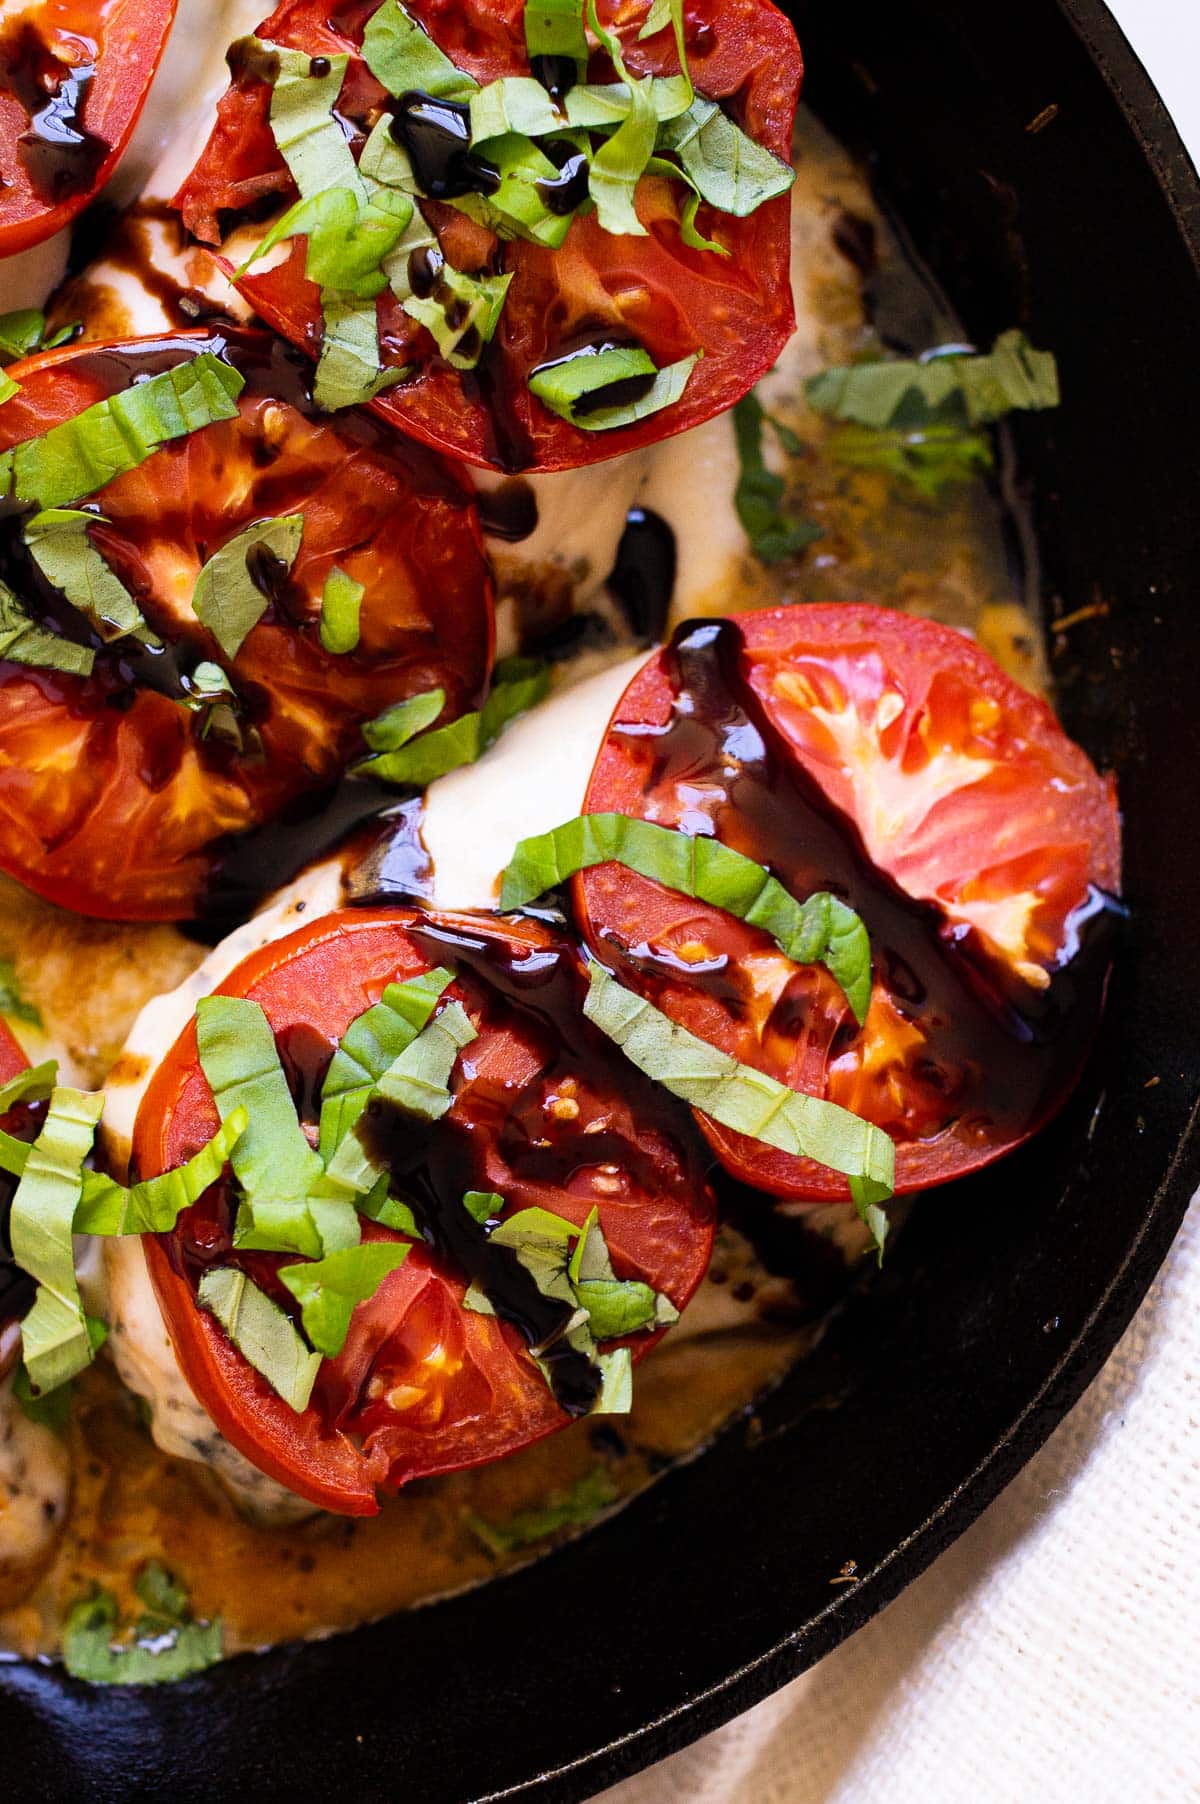 Baked chicken caprese garnished with balsamic glaze and fresh basil in a skillet.